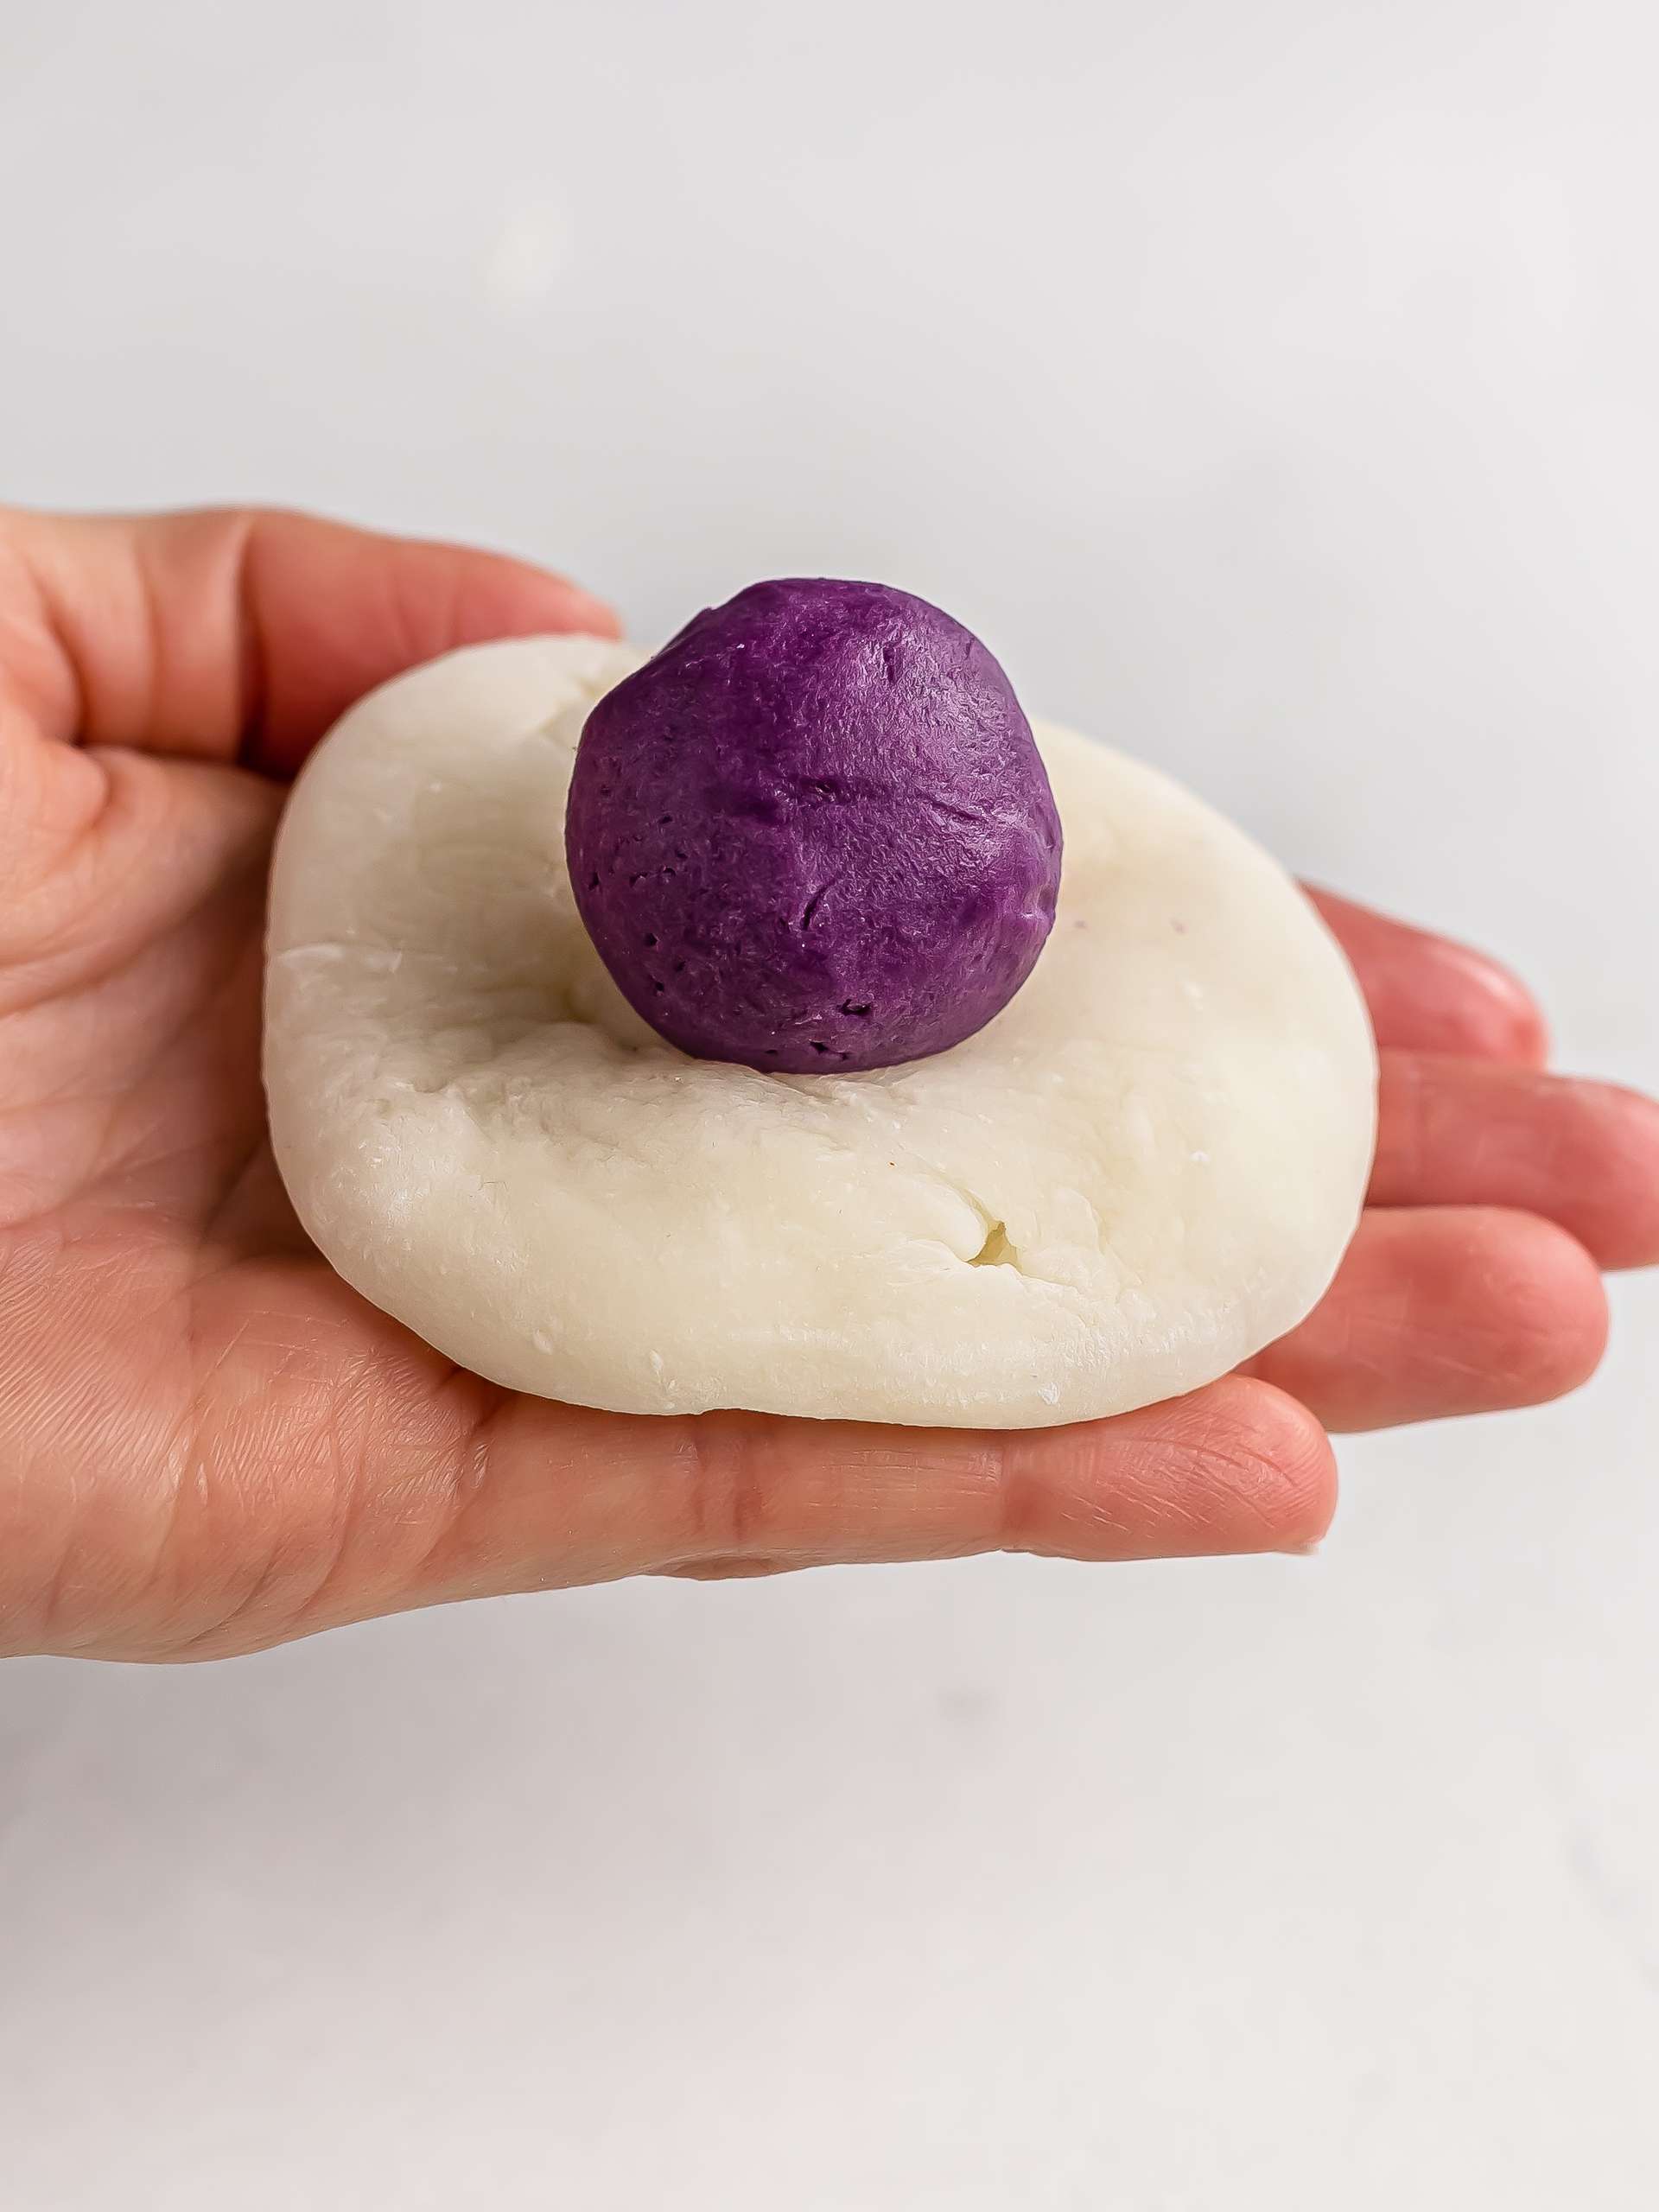 mochi with ube butter filling